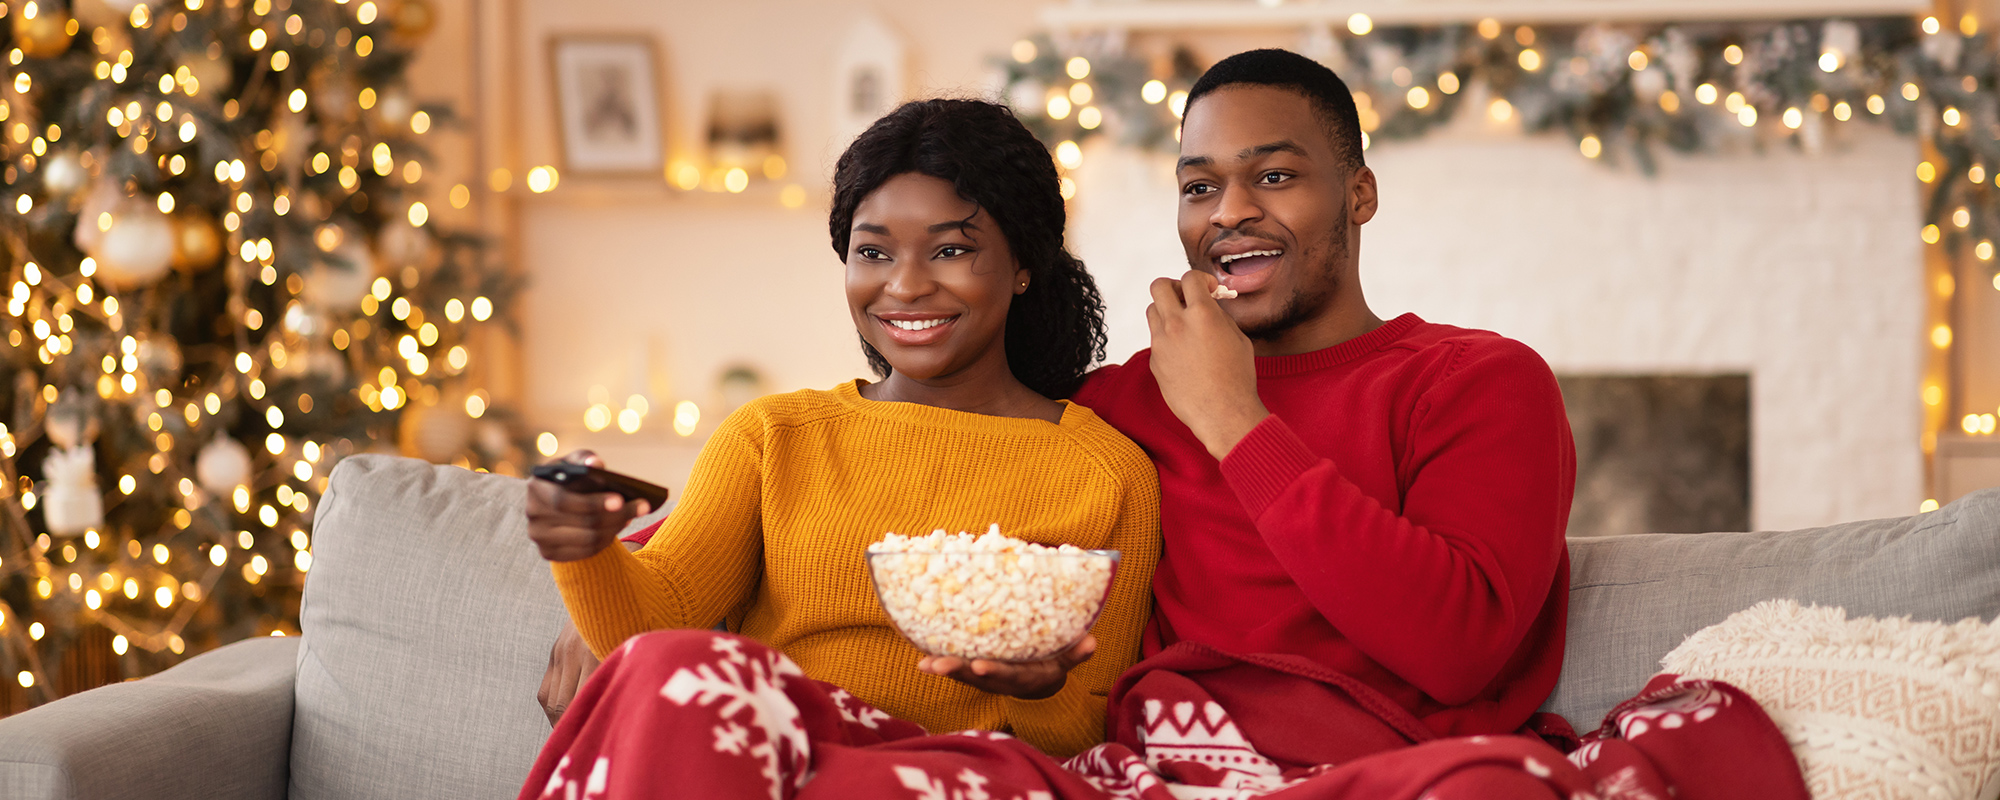 A happy couple sitting on a safe with a Chrstmas blanket across their laps. She;s pointing the remote at the TV and he's eating some popcorn from the big bowl they're holding